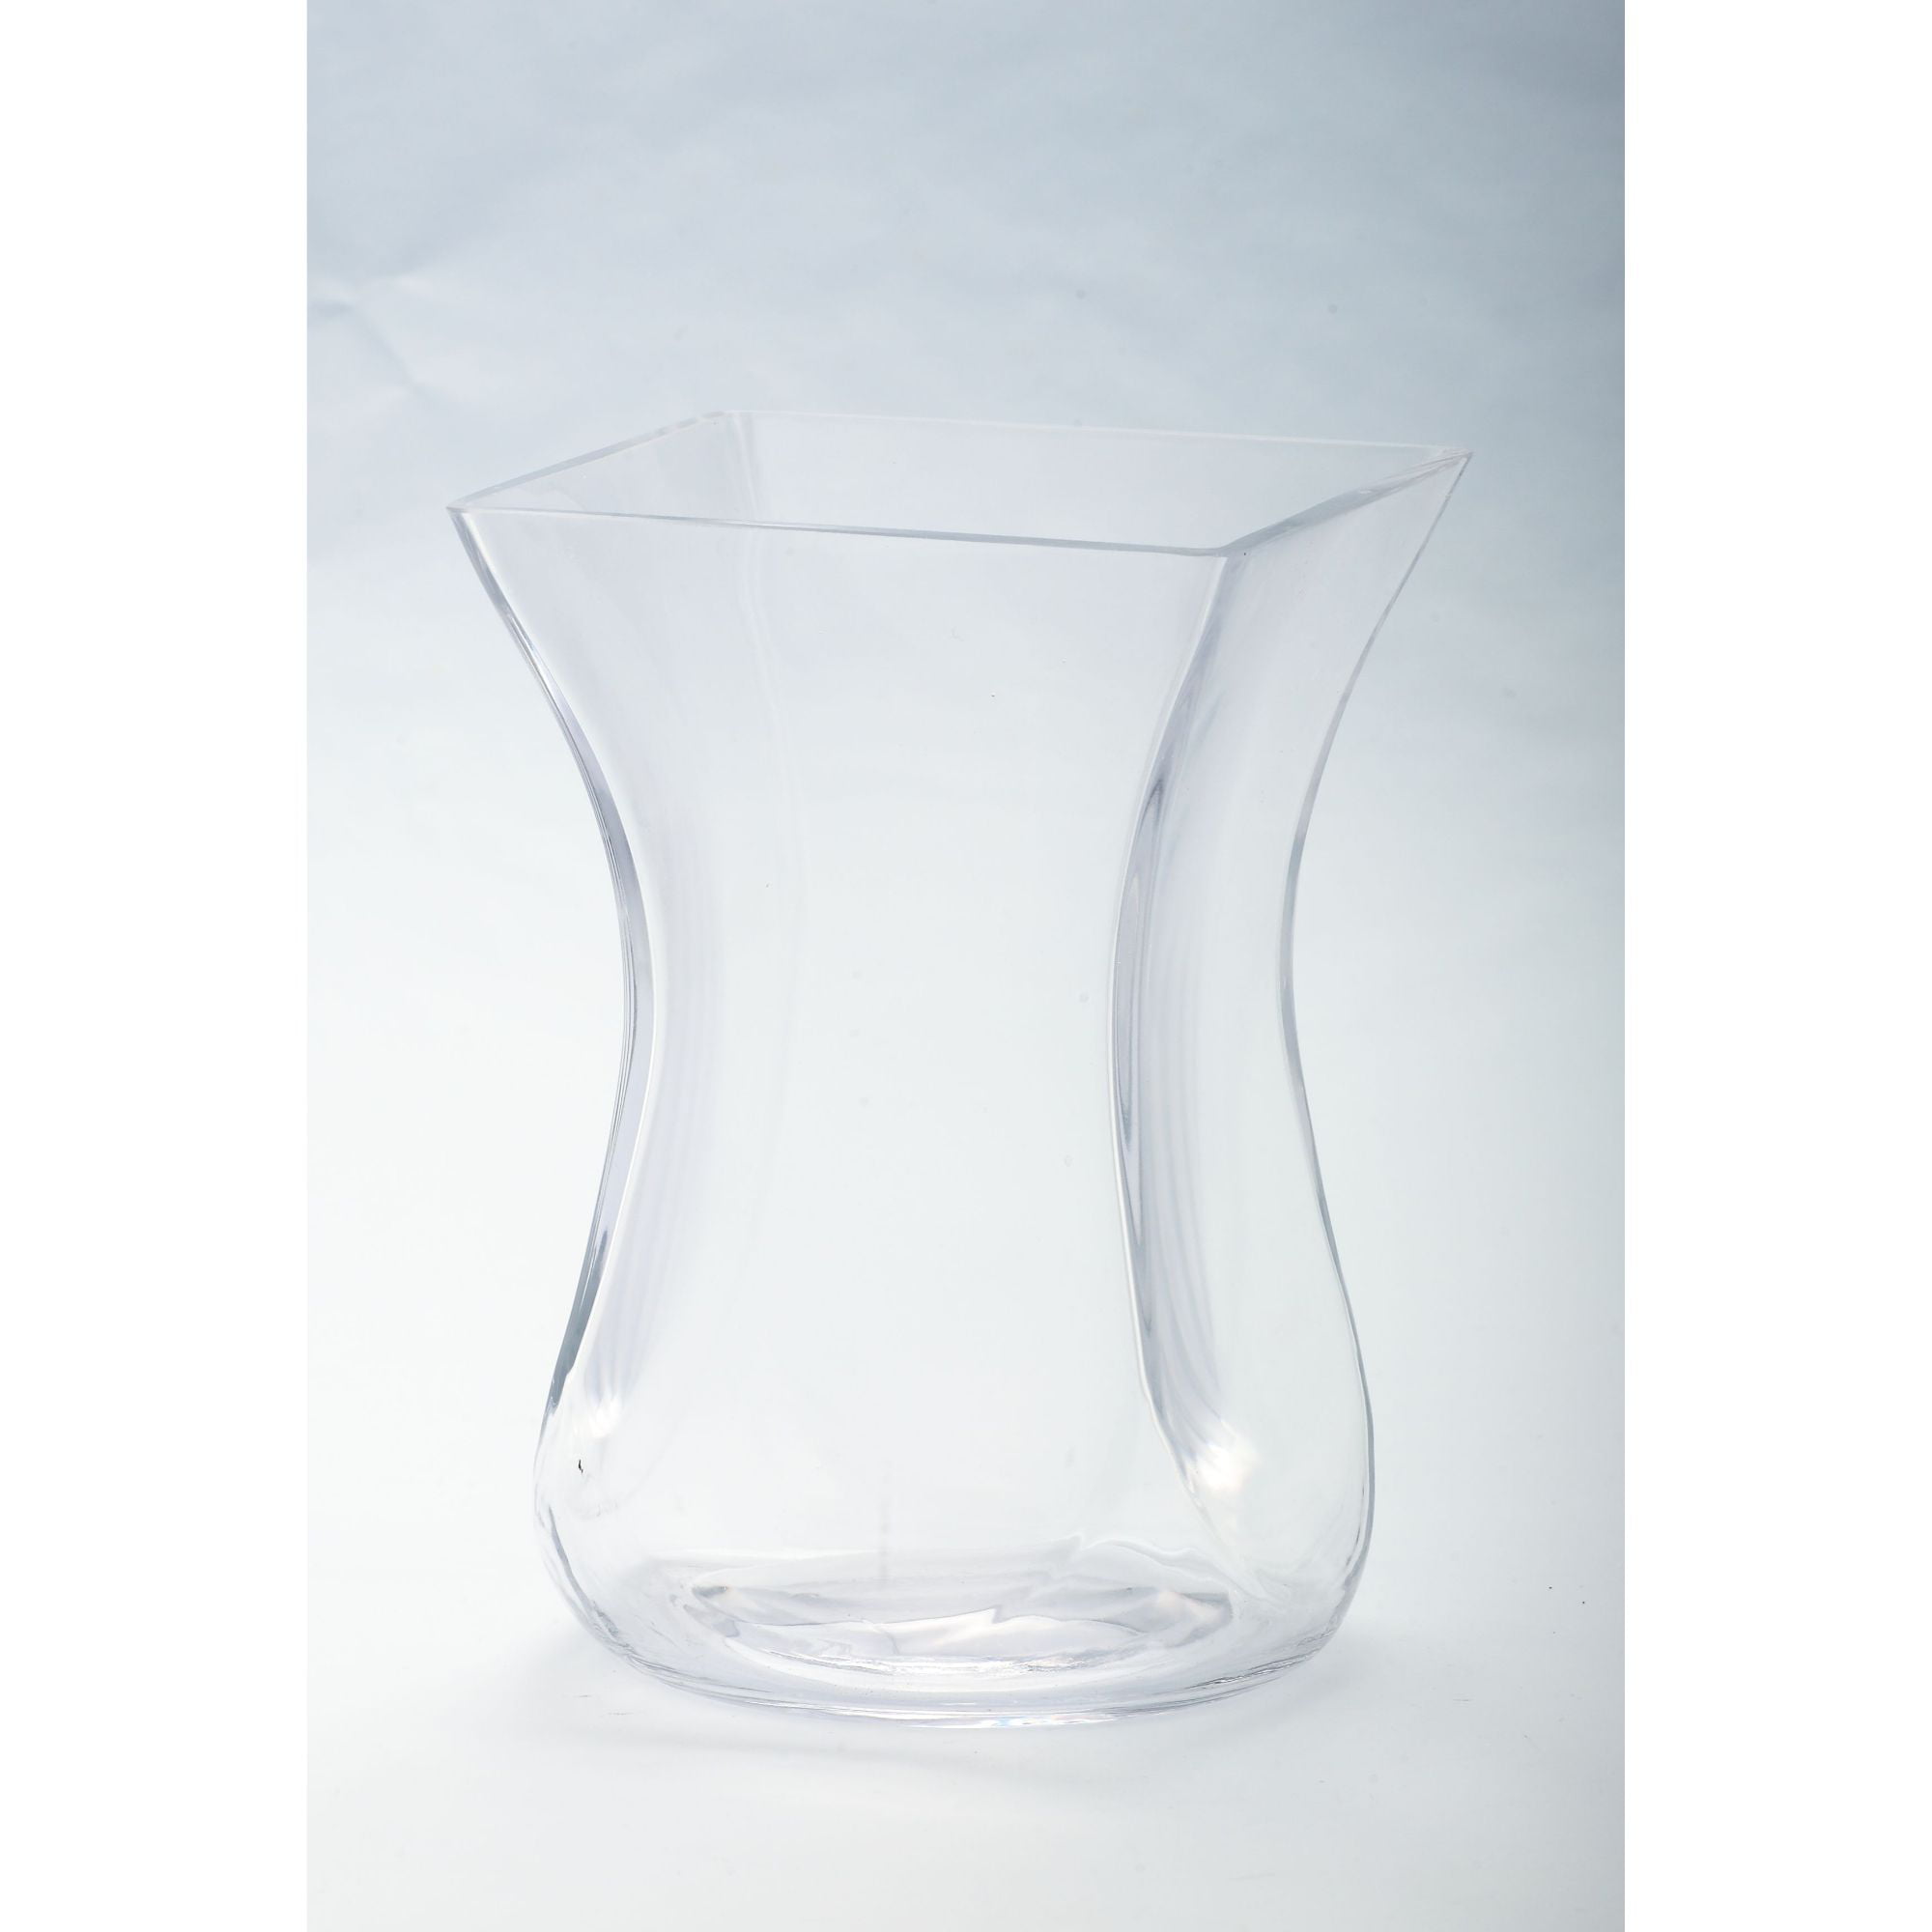 Designer Flower Vase 9in H x 4in W x 4in D Clear Modern Square Tapered Glass 